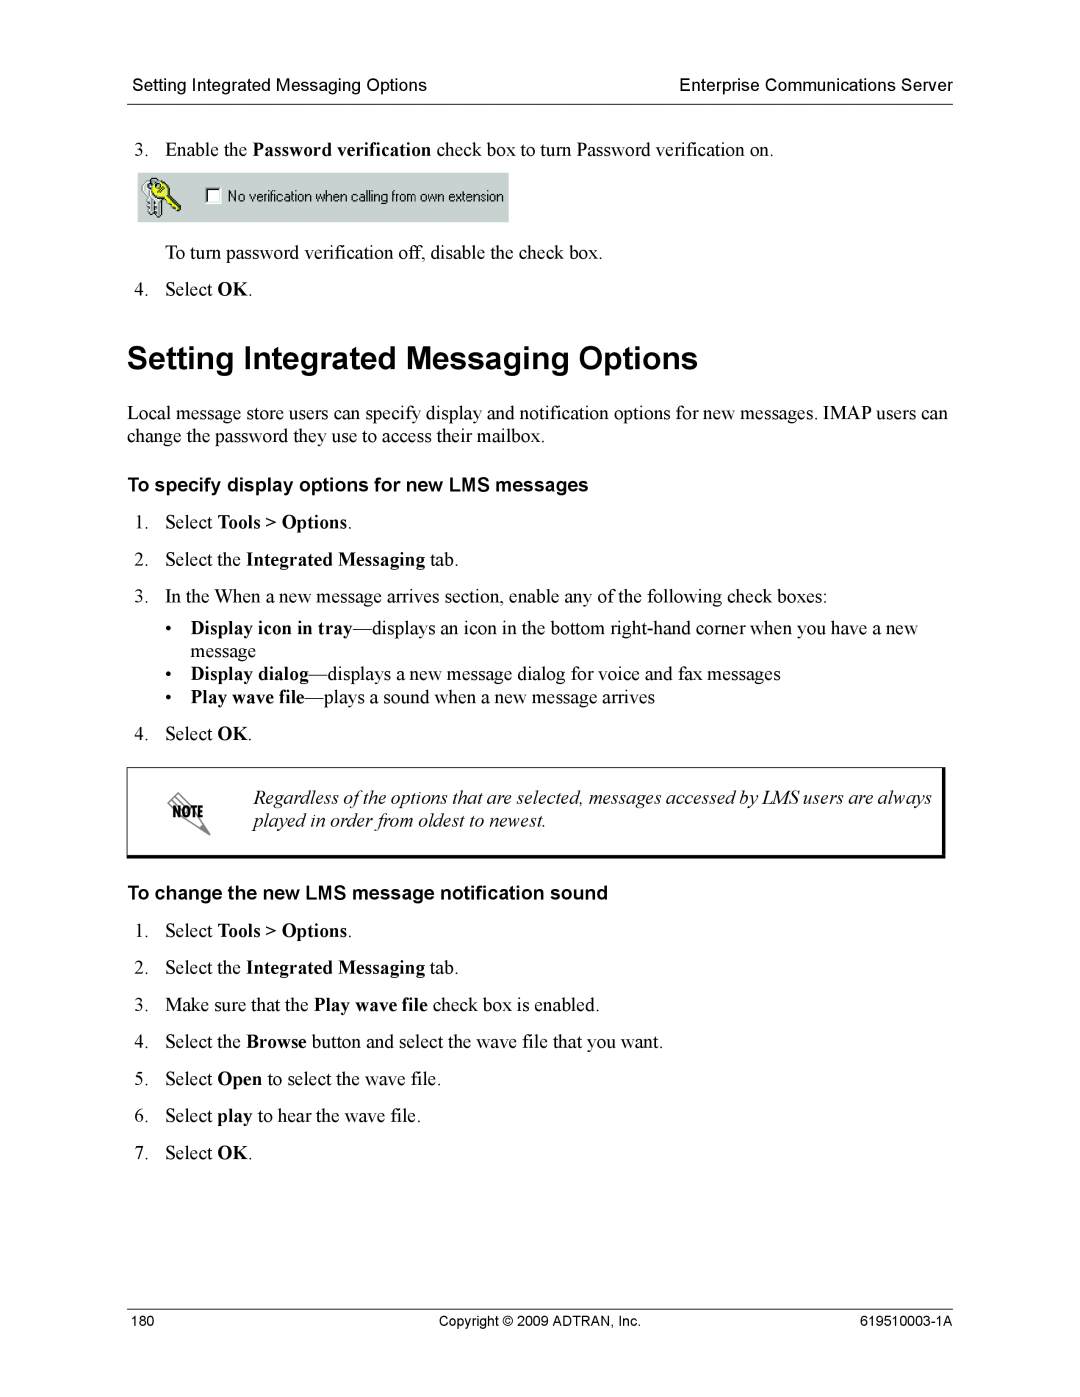 ADTRAN 619510003-1A manual Setting Integrated Messaging Options, To specify display options for new LMS messages 